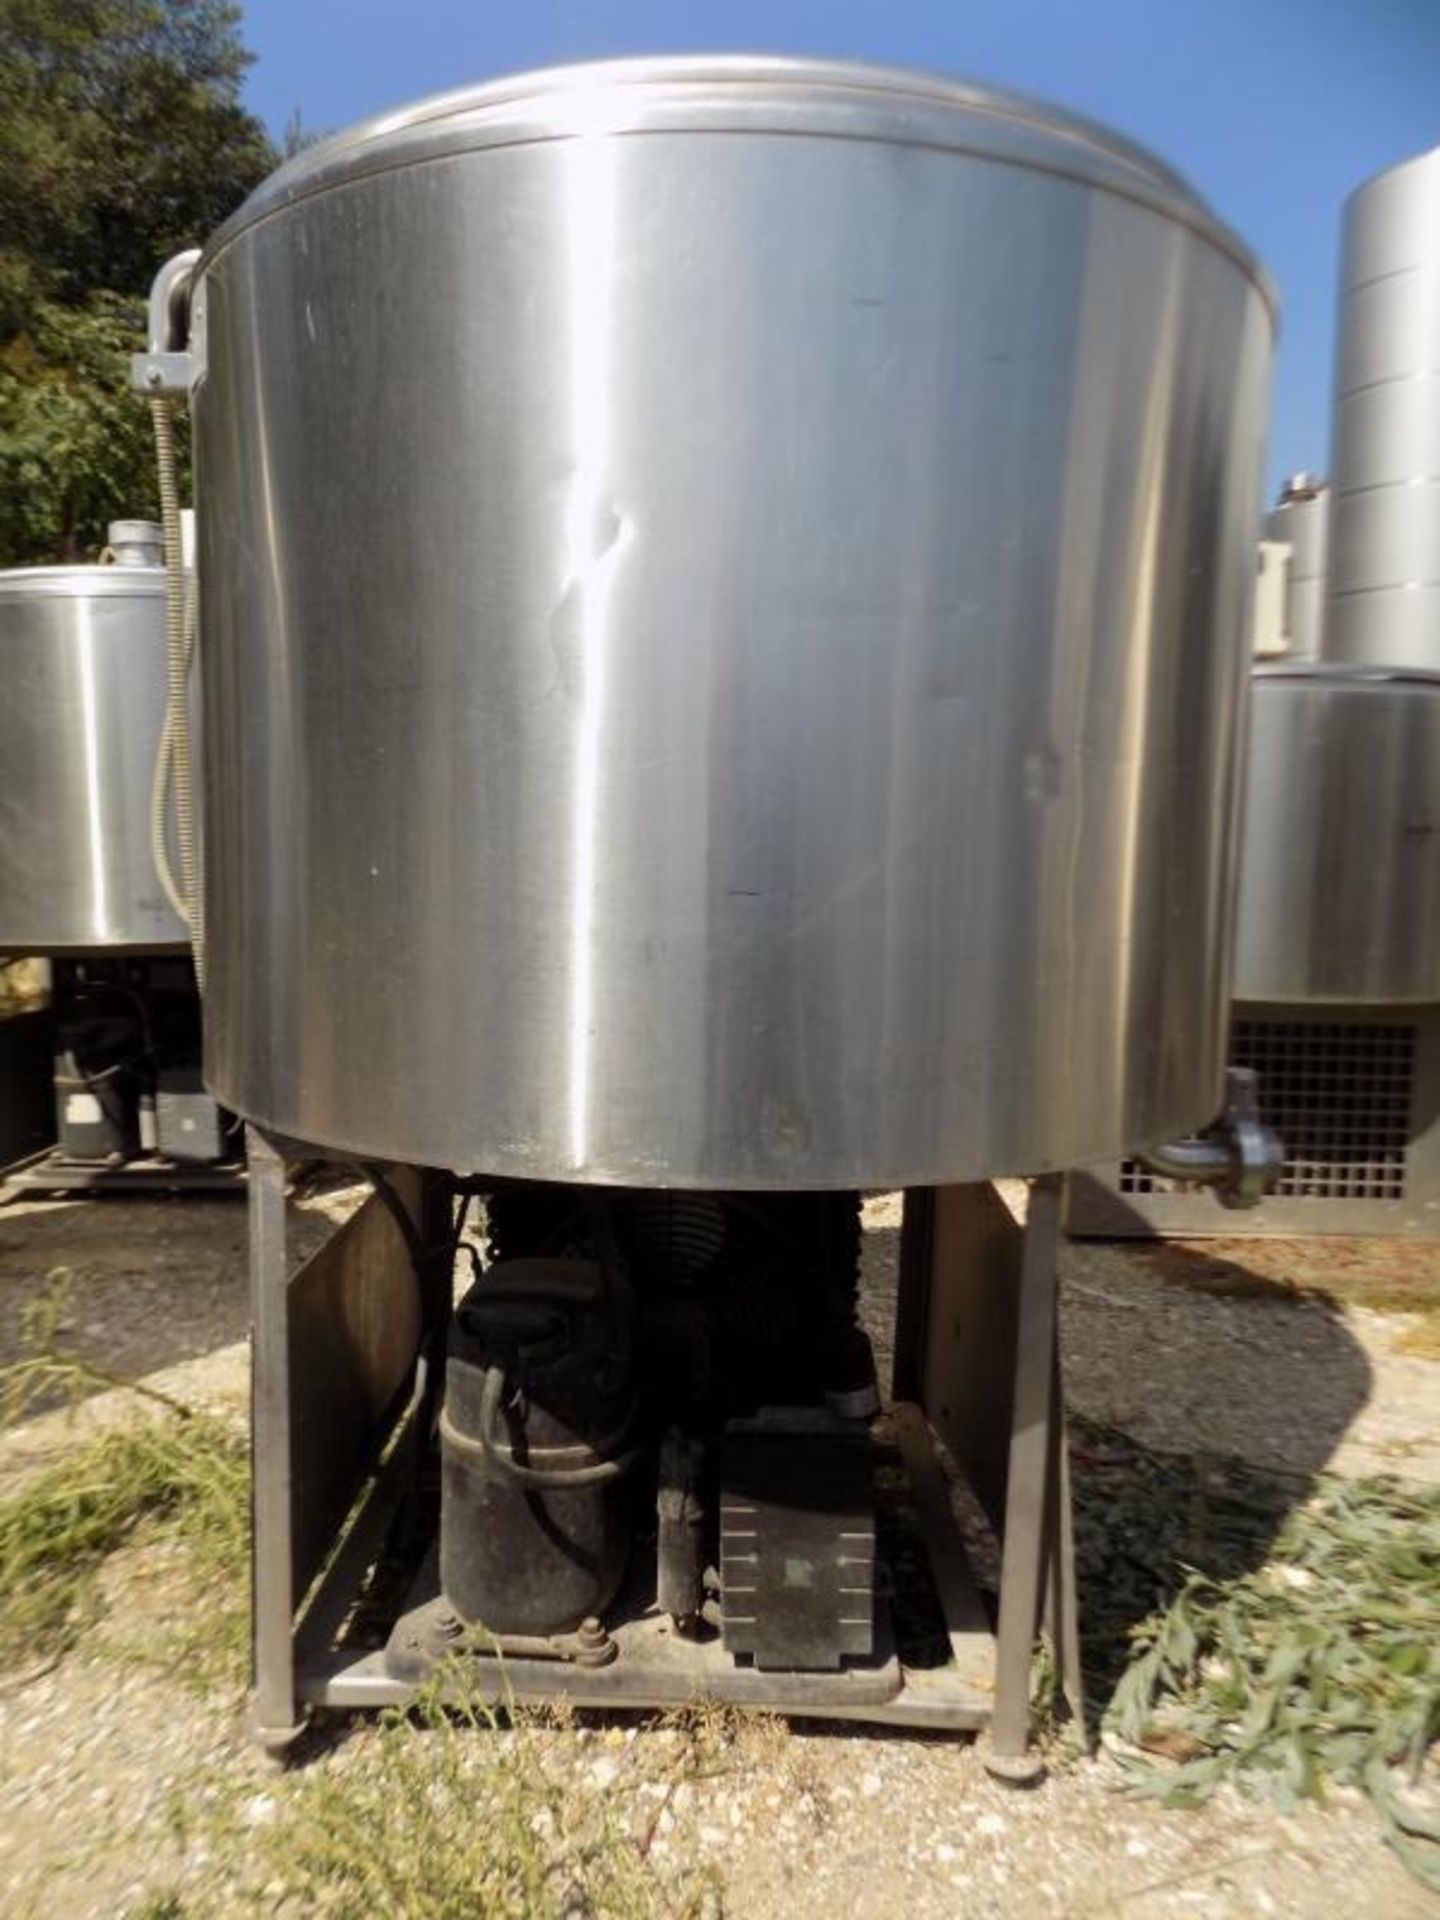 Ermicon (Packo) Aprox. 300 L/79 Gal. S/S Jacketed Farm Tank with Hinged Lid, Twin Blade Prop, - Image 5 of 5